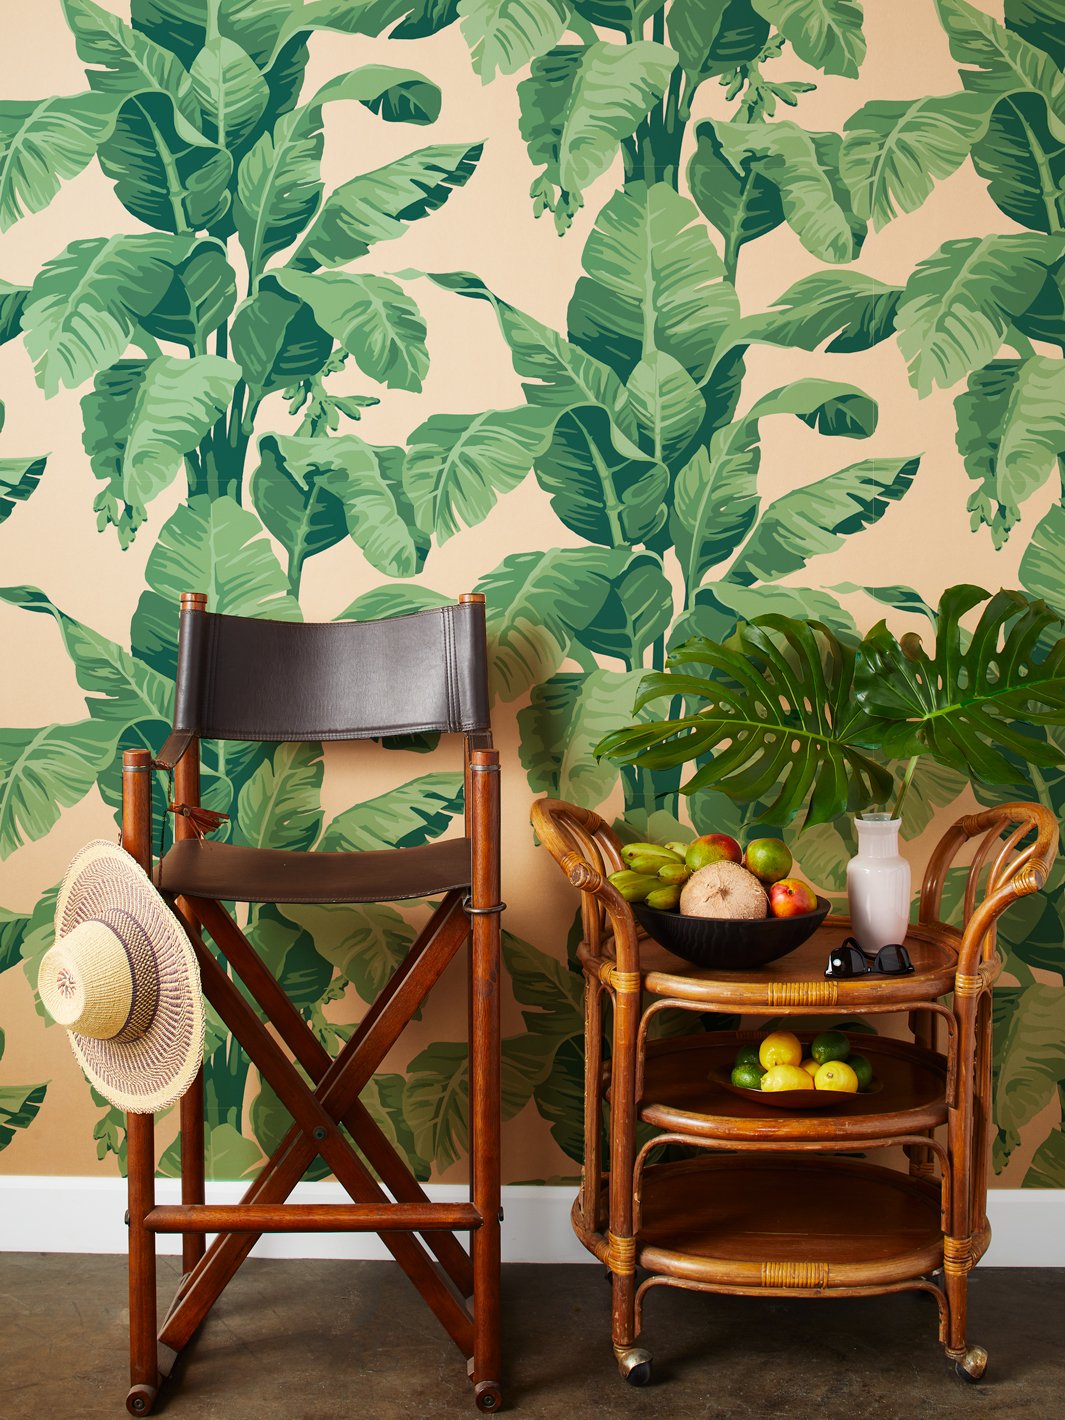 'Pacifico Palm' Kraft' Wallpaper by Nathan Turner - Green